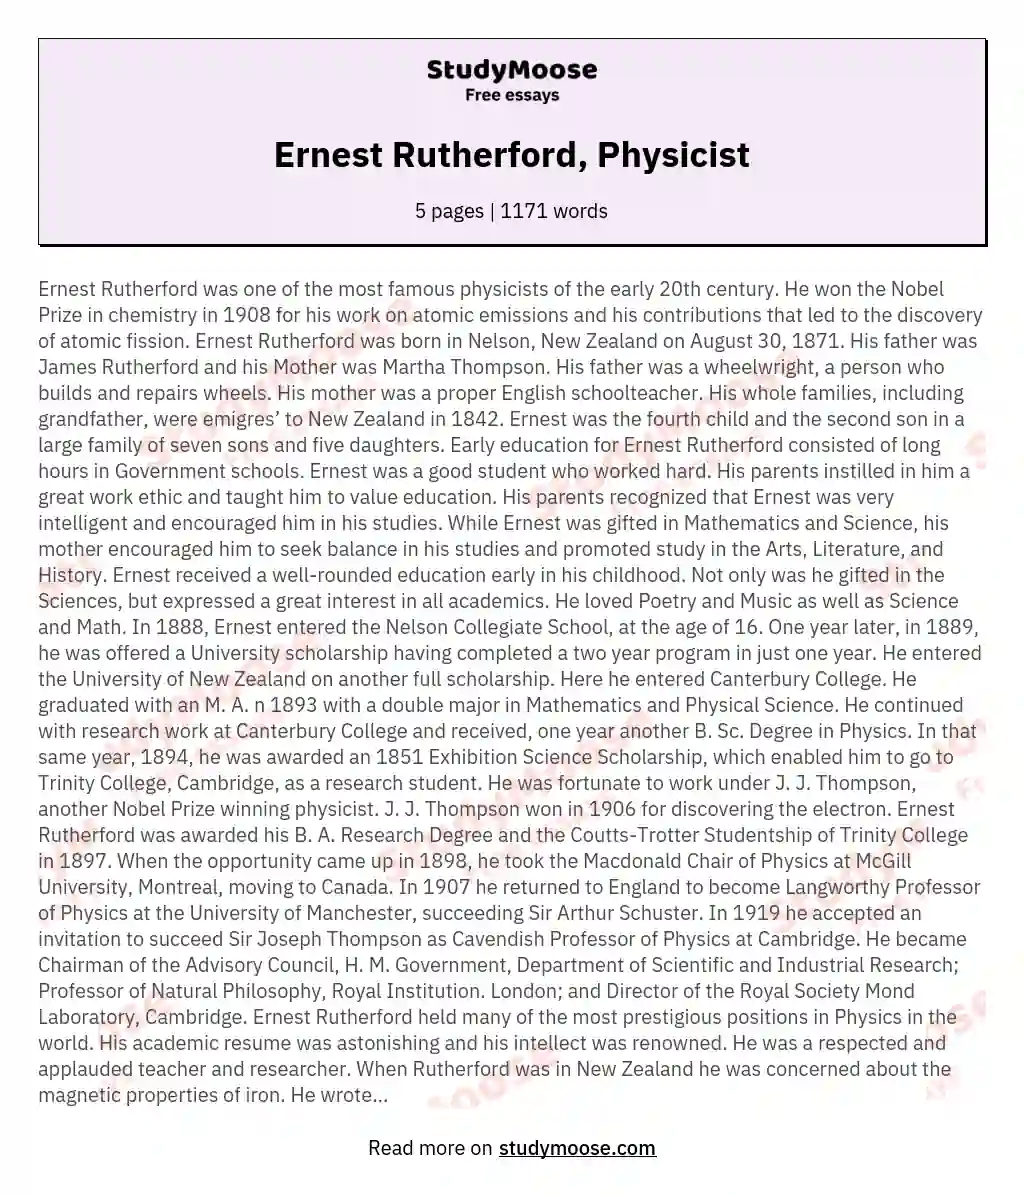 Ernest Rutherford, Physicist